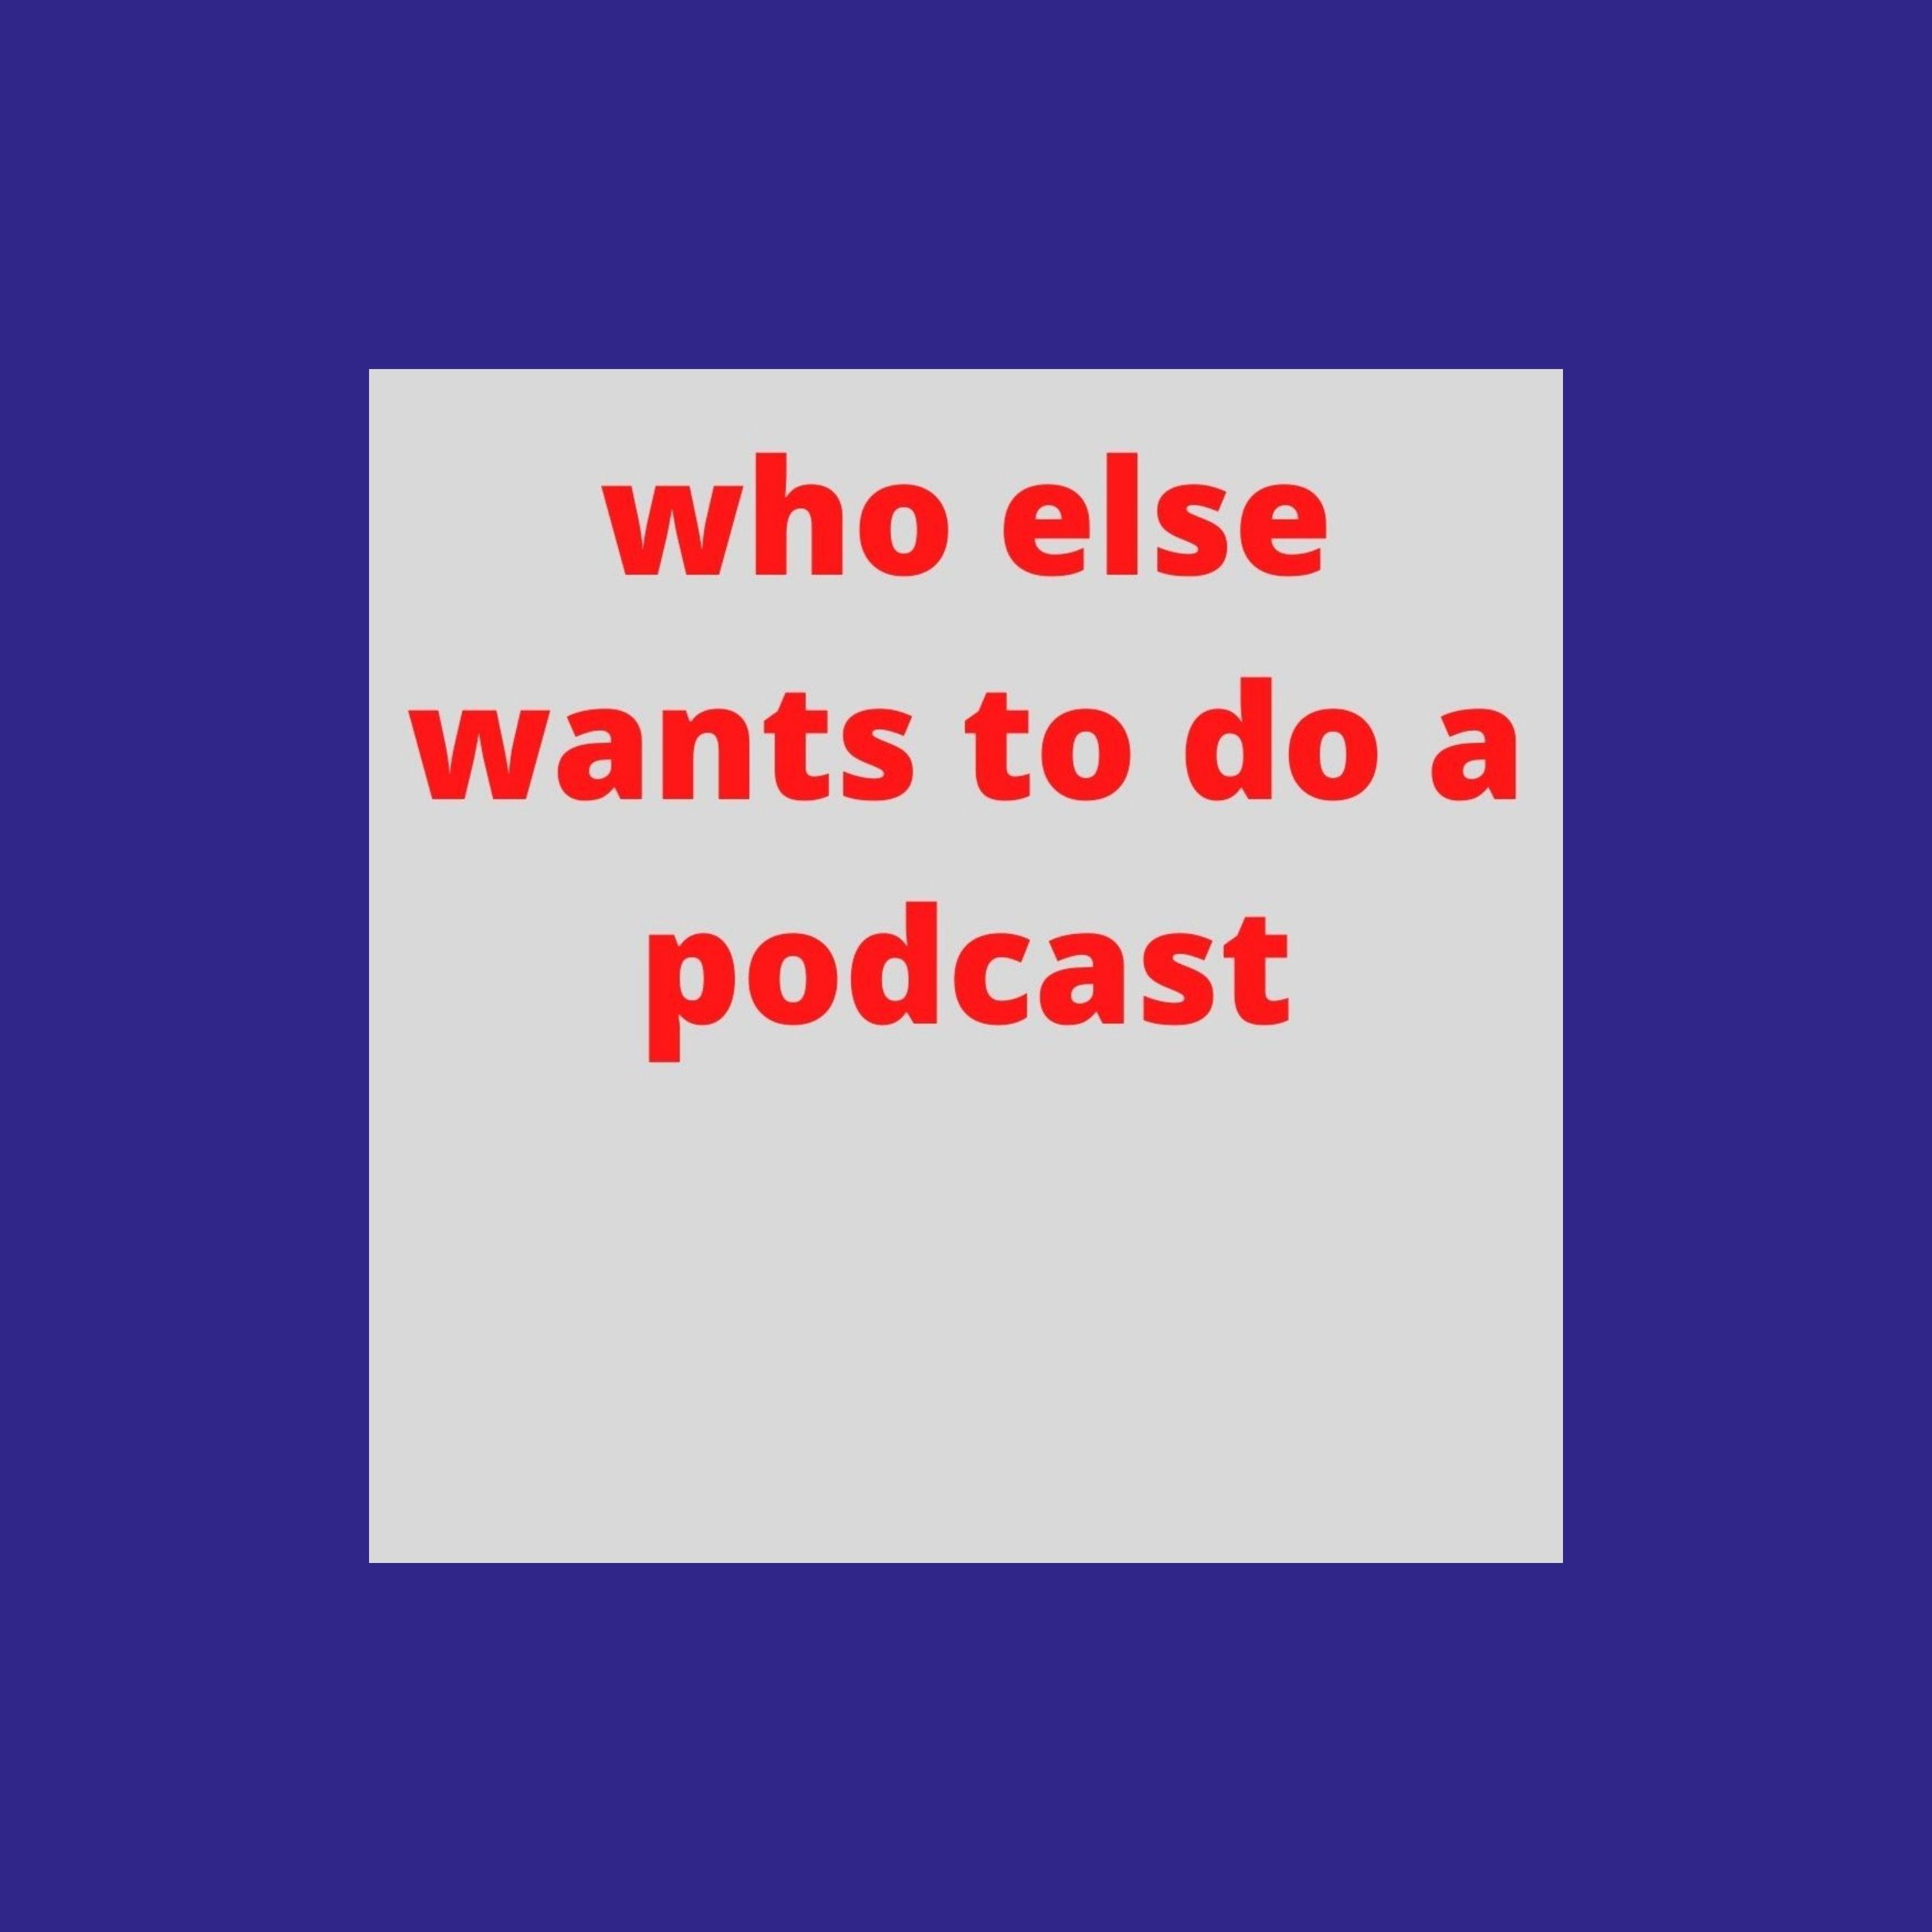 who else wants to do a podcast